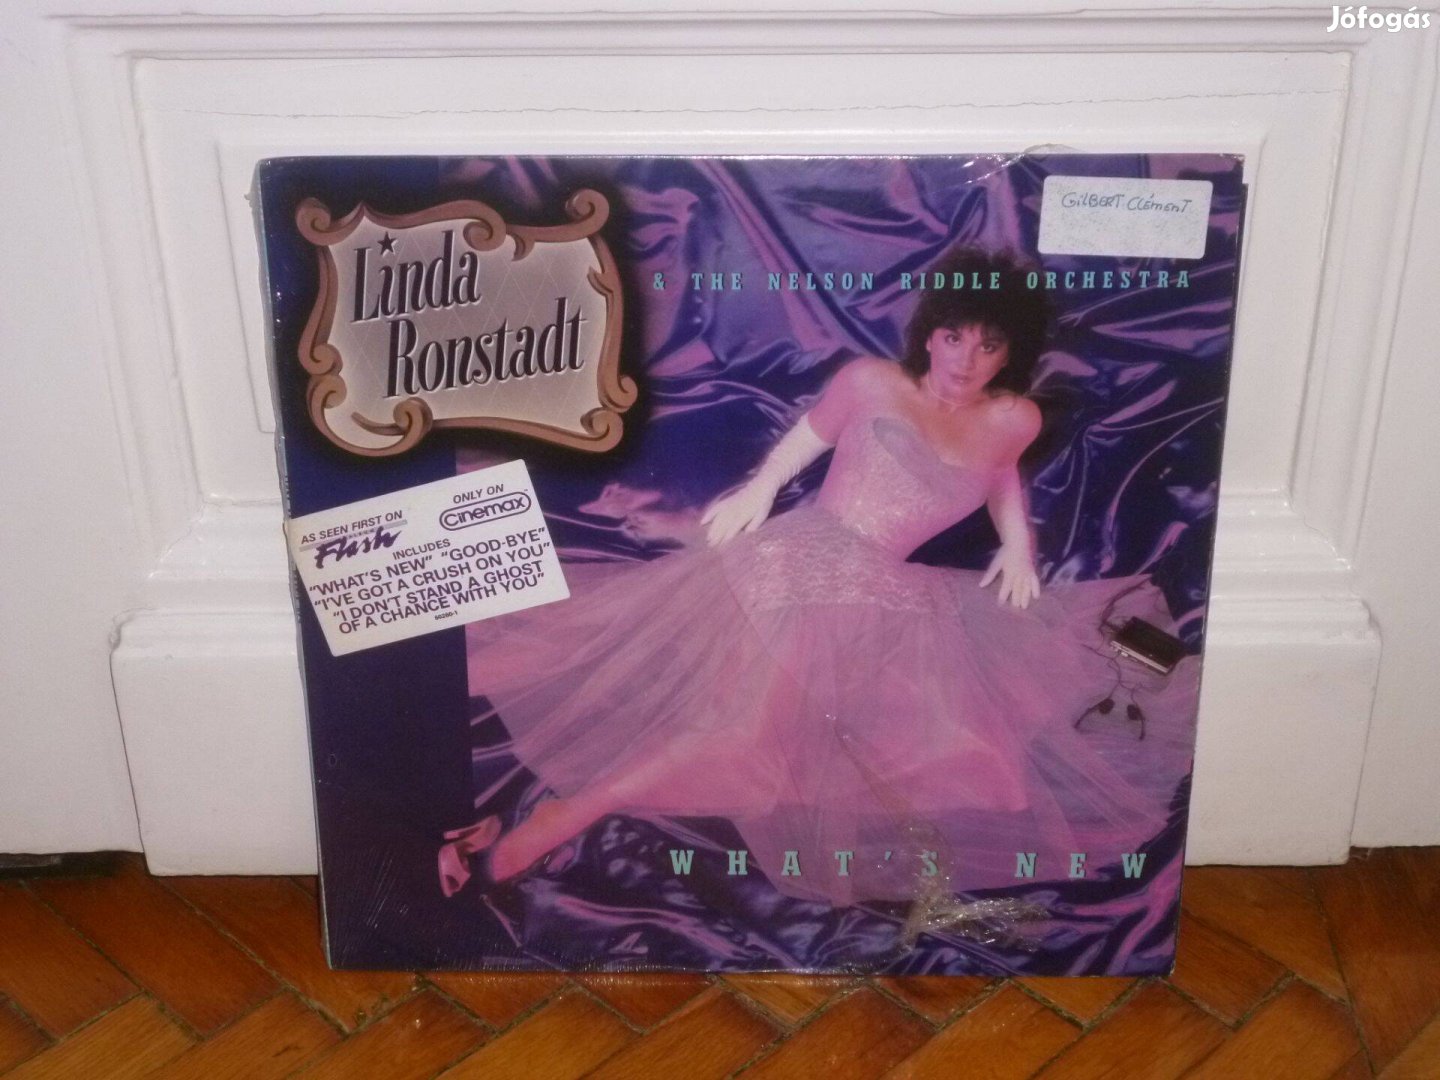 Linda Ronstadt & The Nelson Riddle O. What's New LP 1983 USA